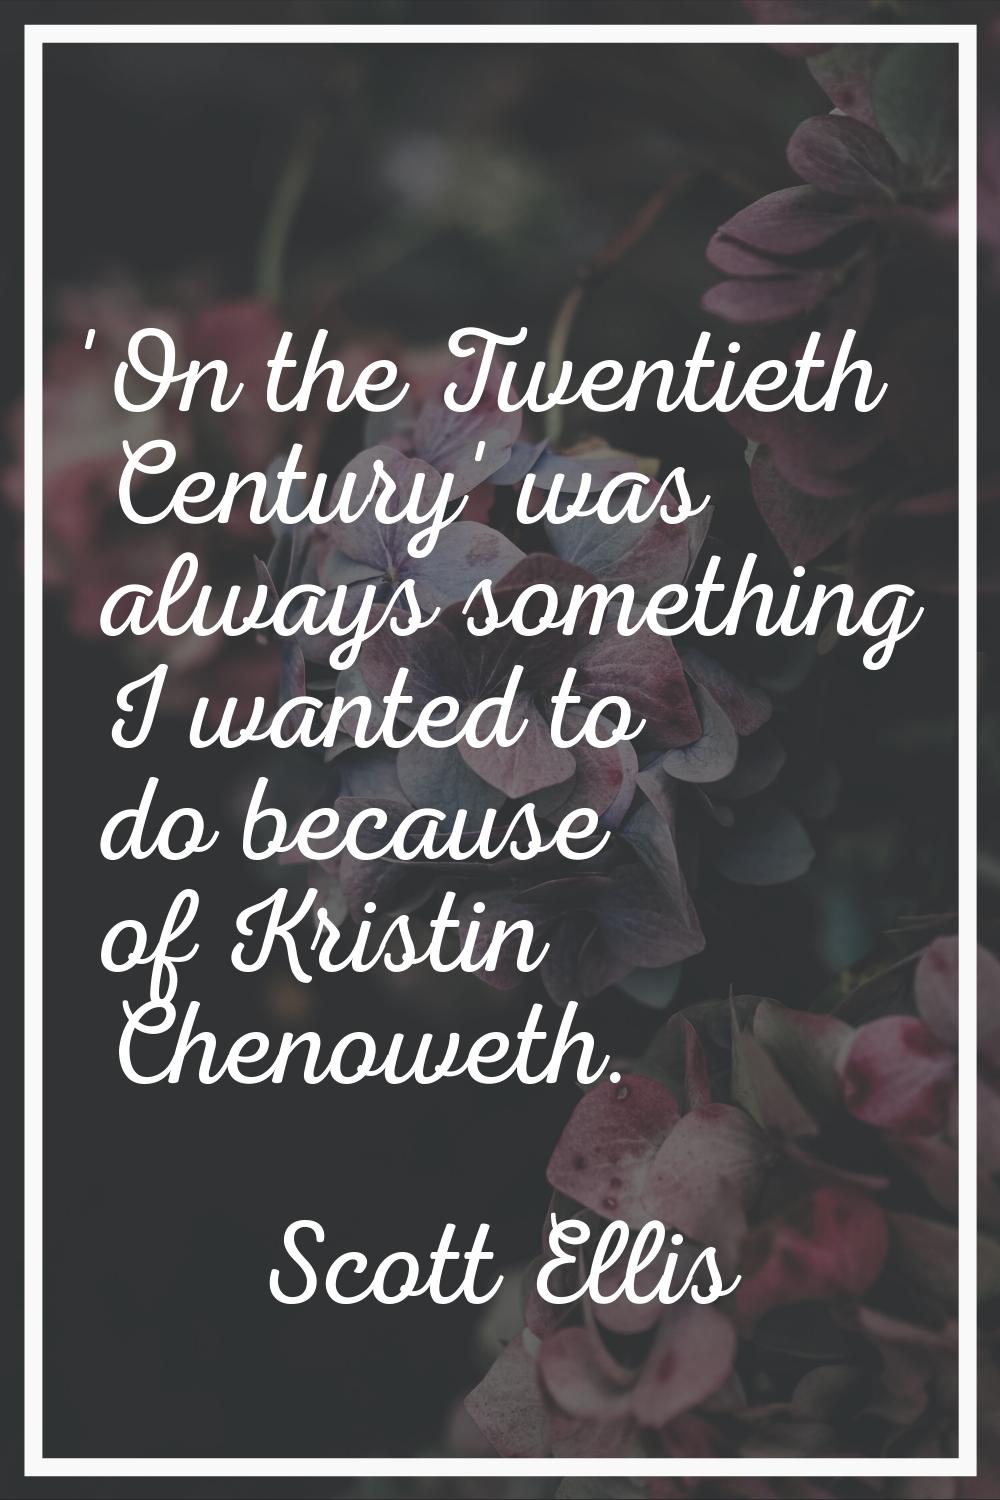 'On the Twentieth Century' was always something I wanted to do because of Kristin Chenoweth.